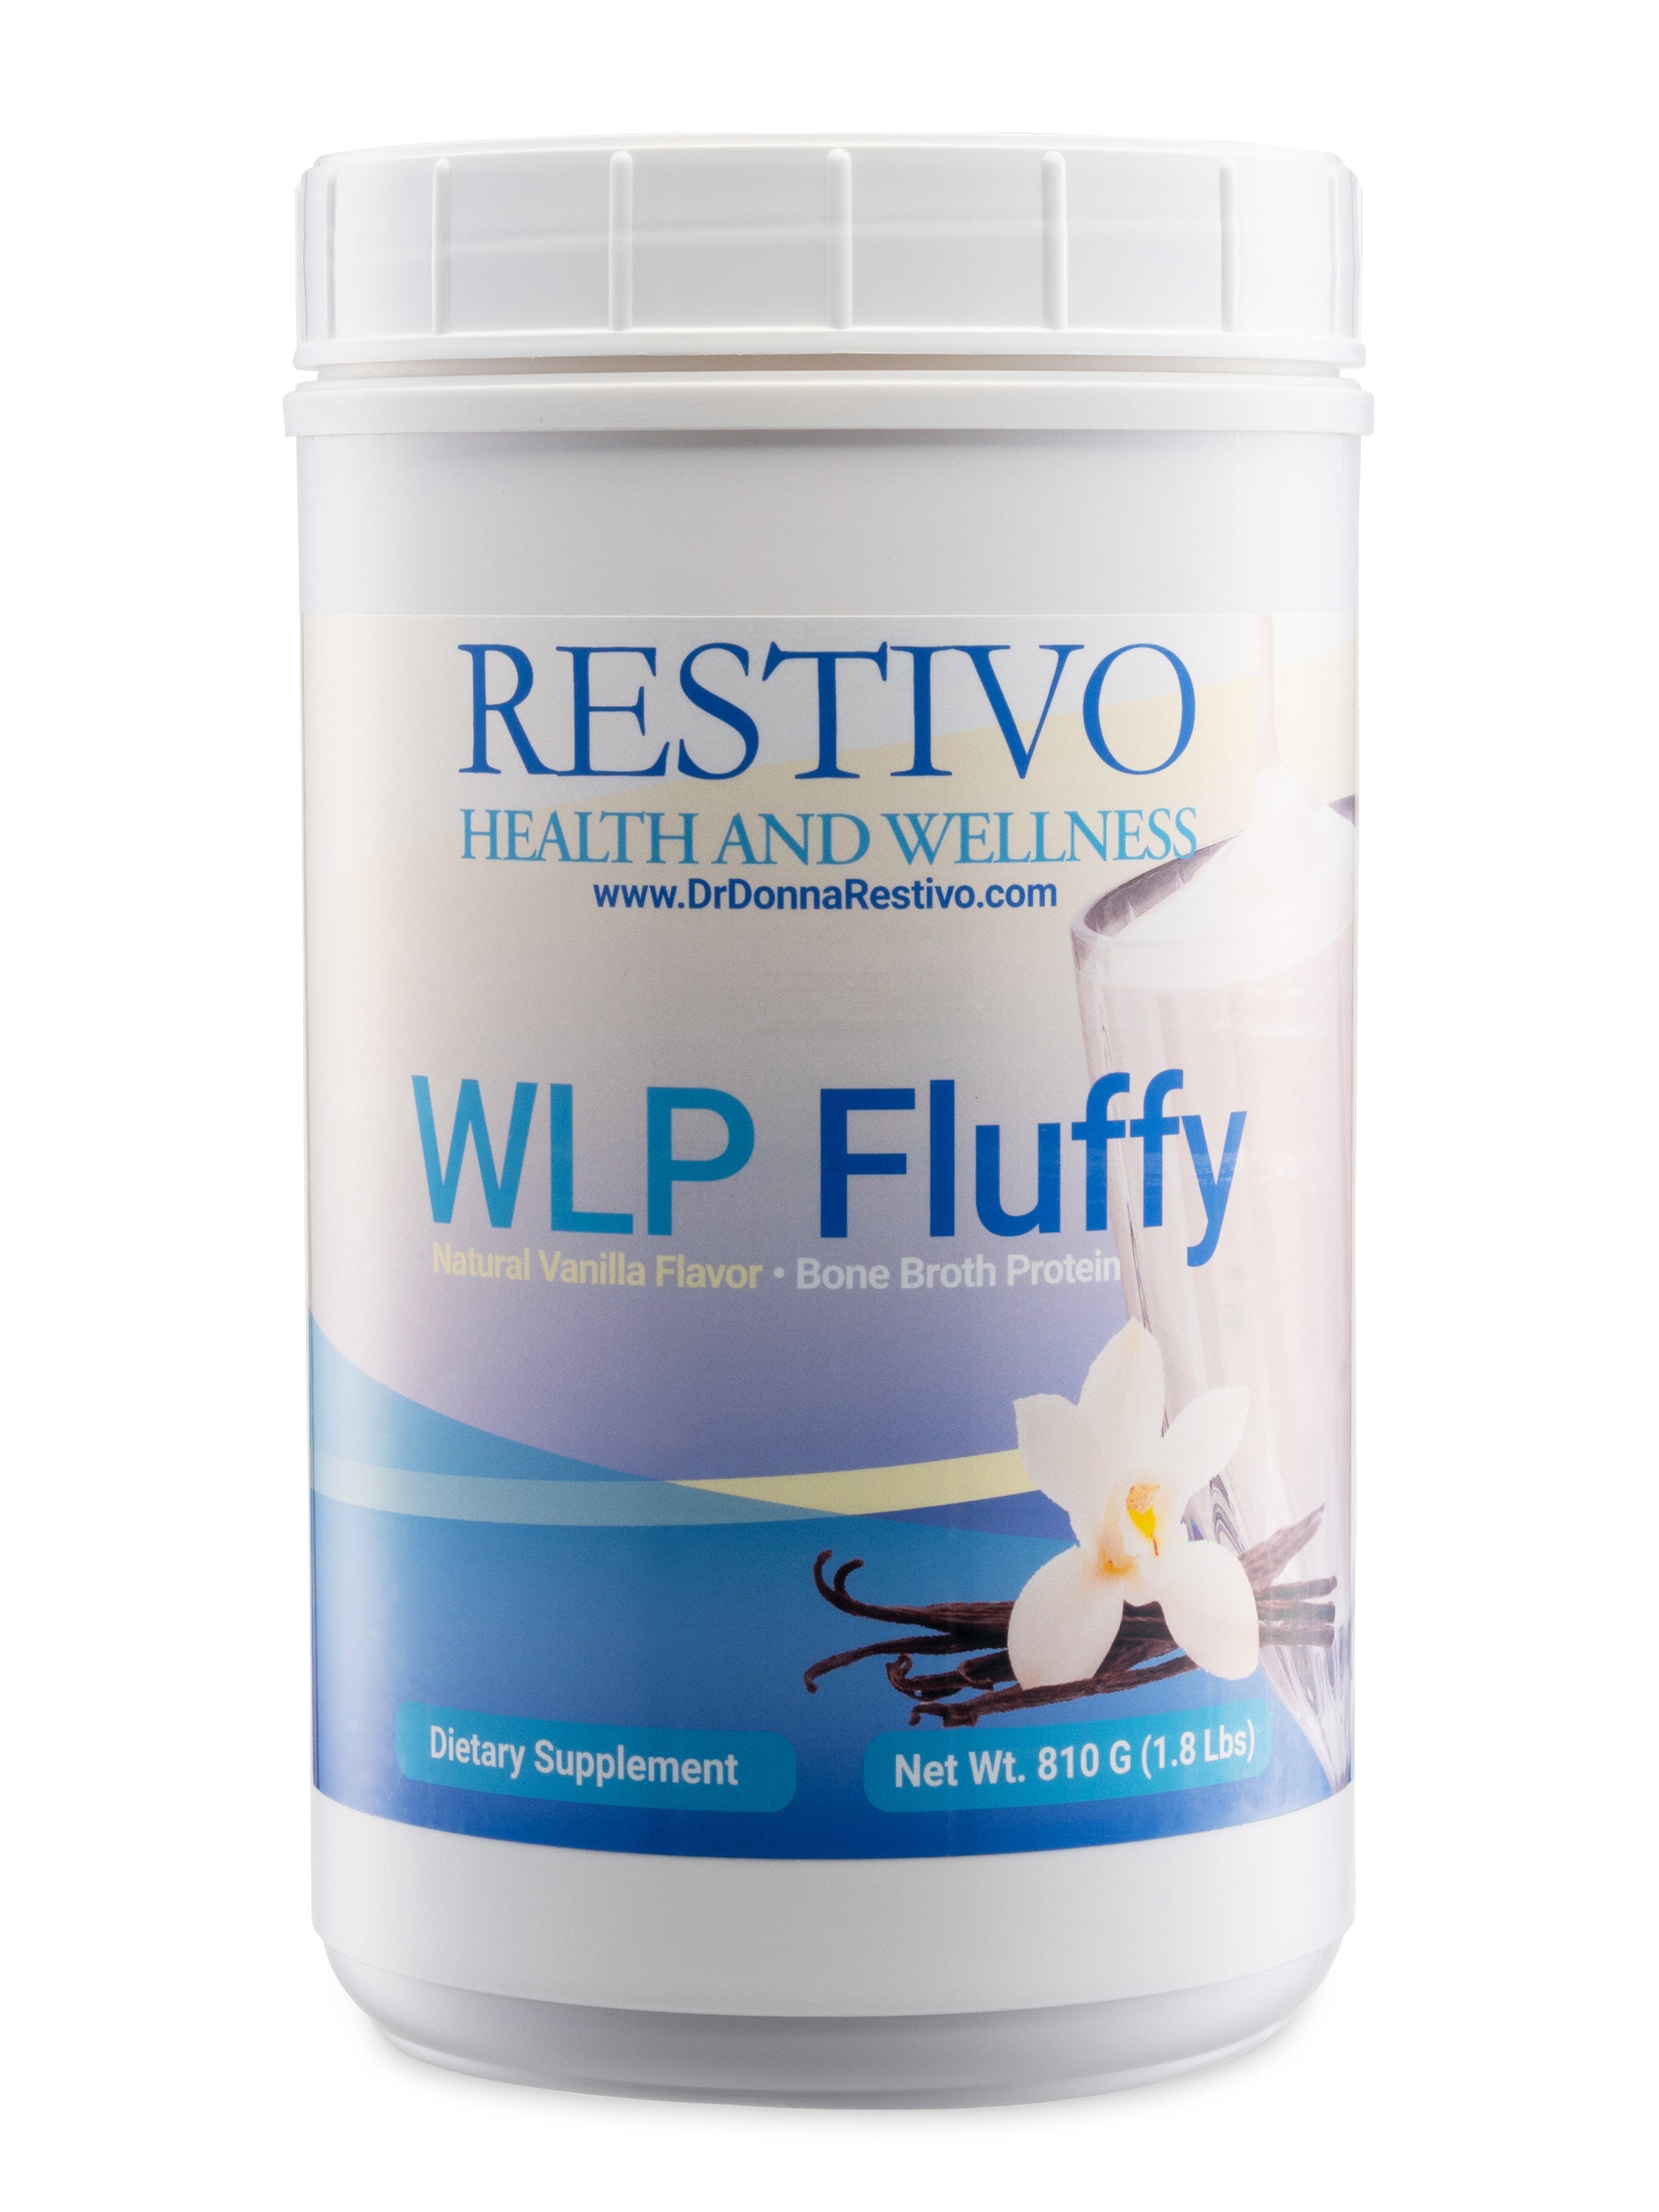 Offer I: BEST SELLING+ 7 EXTRAS +WLP40 REBOOT METABOLISM +Lose Up To 1 LB/ Day + LASTS  14 WEEKS +EXPIRES 10 DAYS